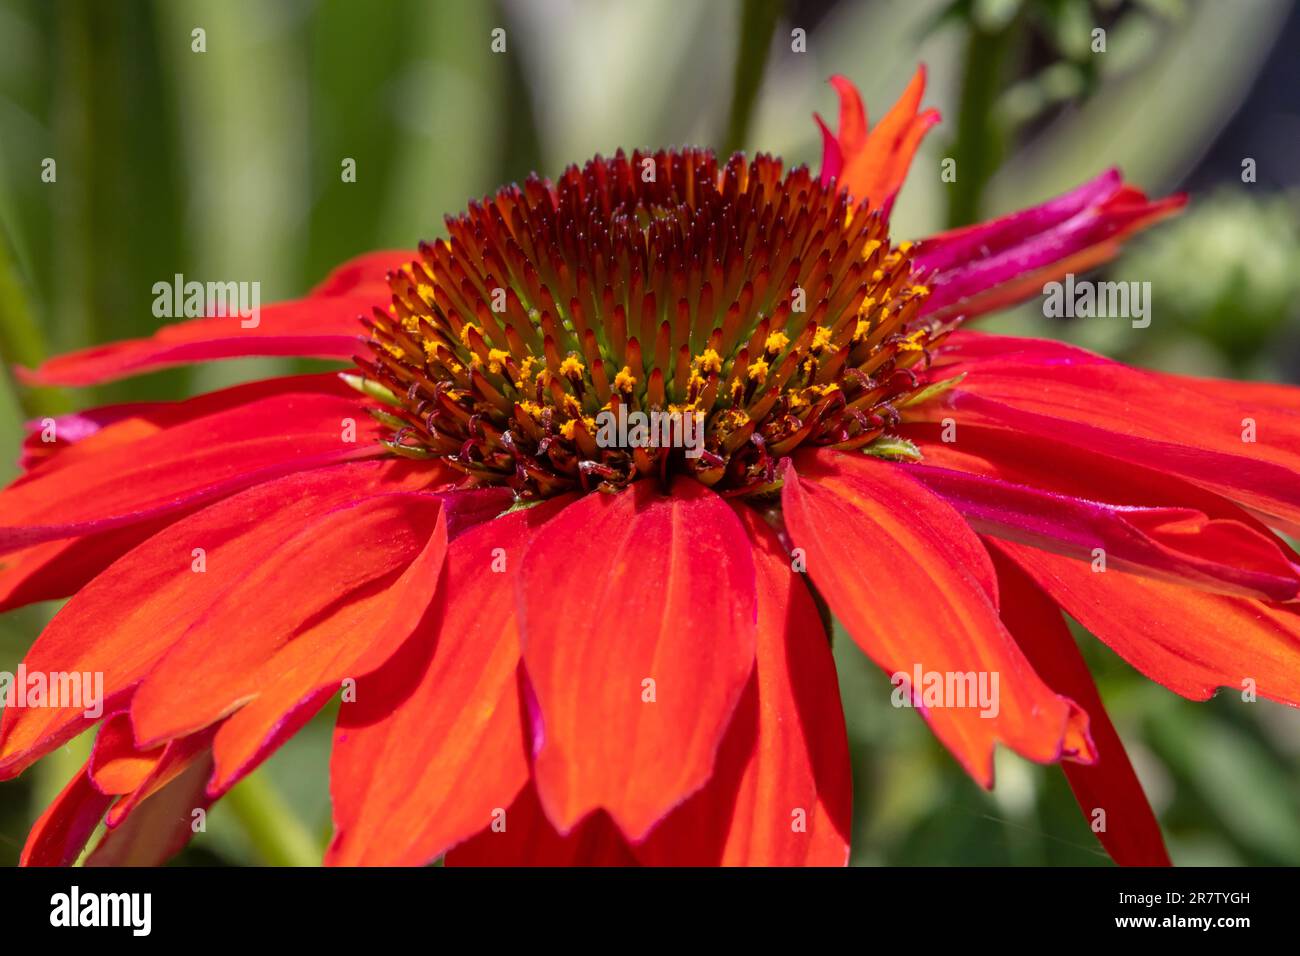 Closeup of a red coneflower disk, showing stigmas and yellow pollen grains. Stock Photo